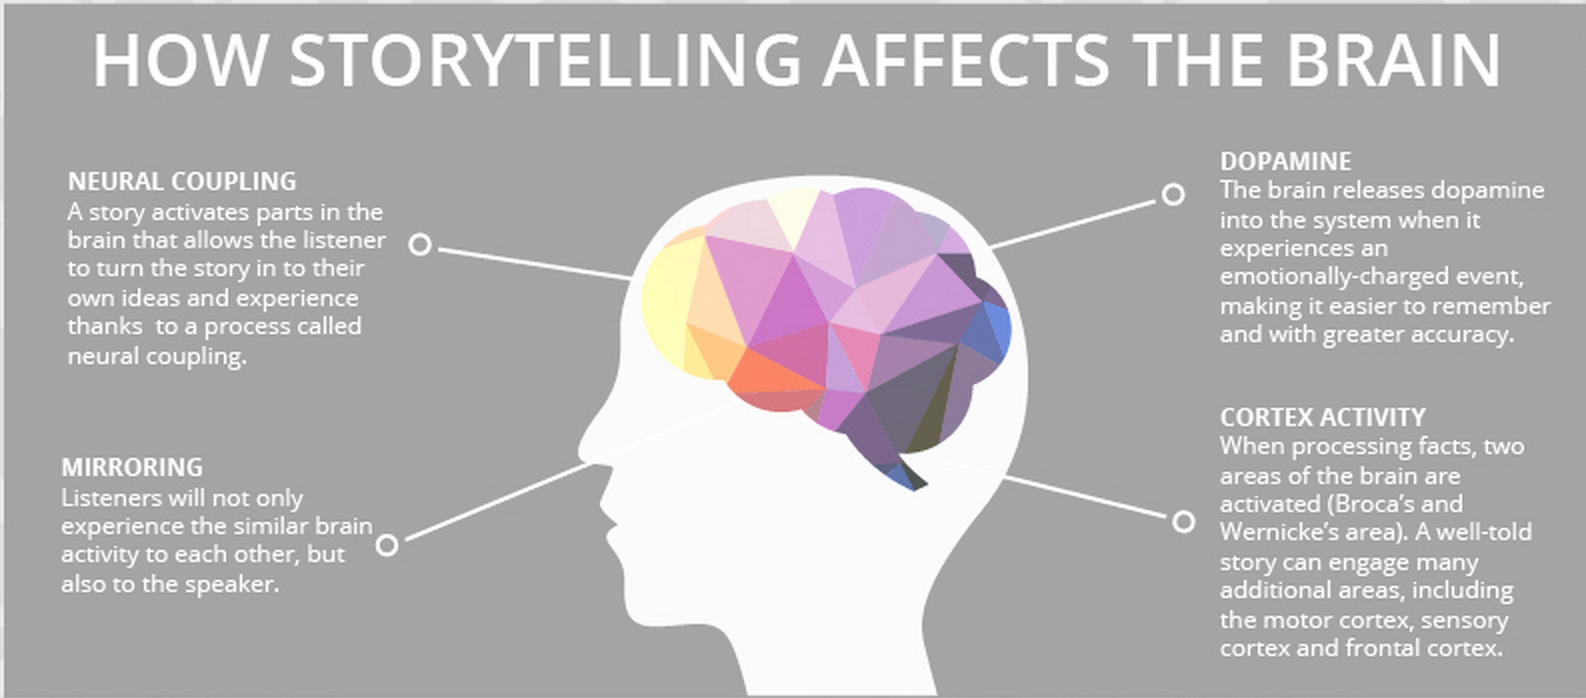 How Story Telling Affects the Brain